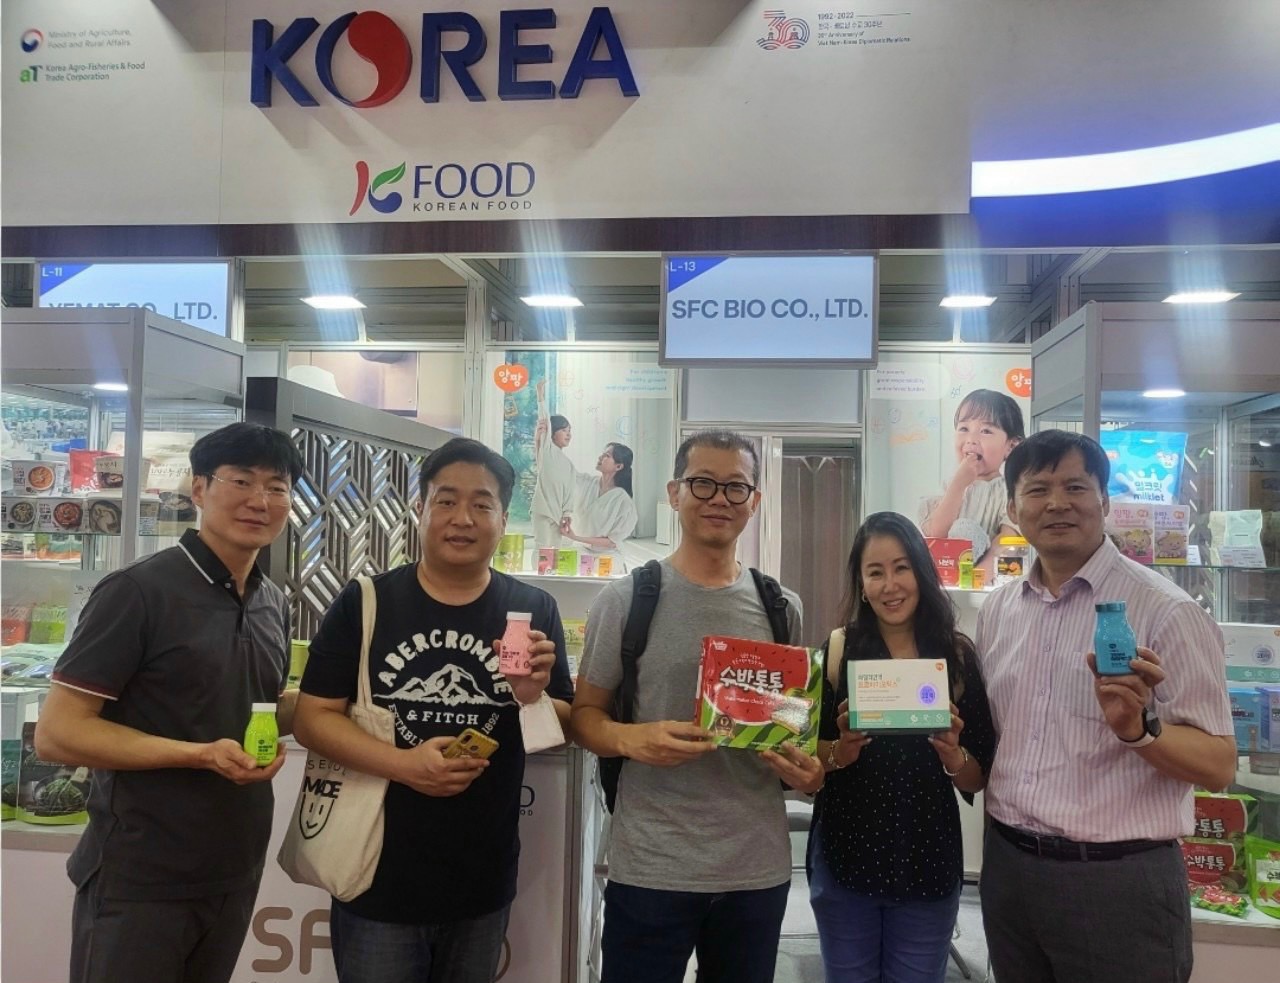 Jessica Cho and her colleagues share some products from South Korea.